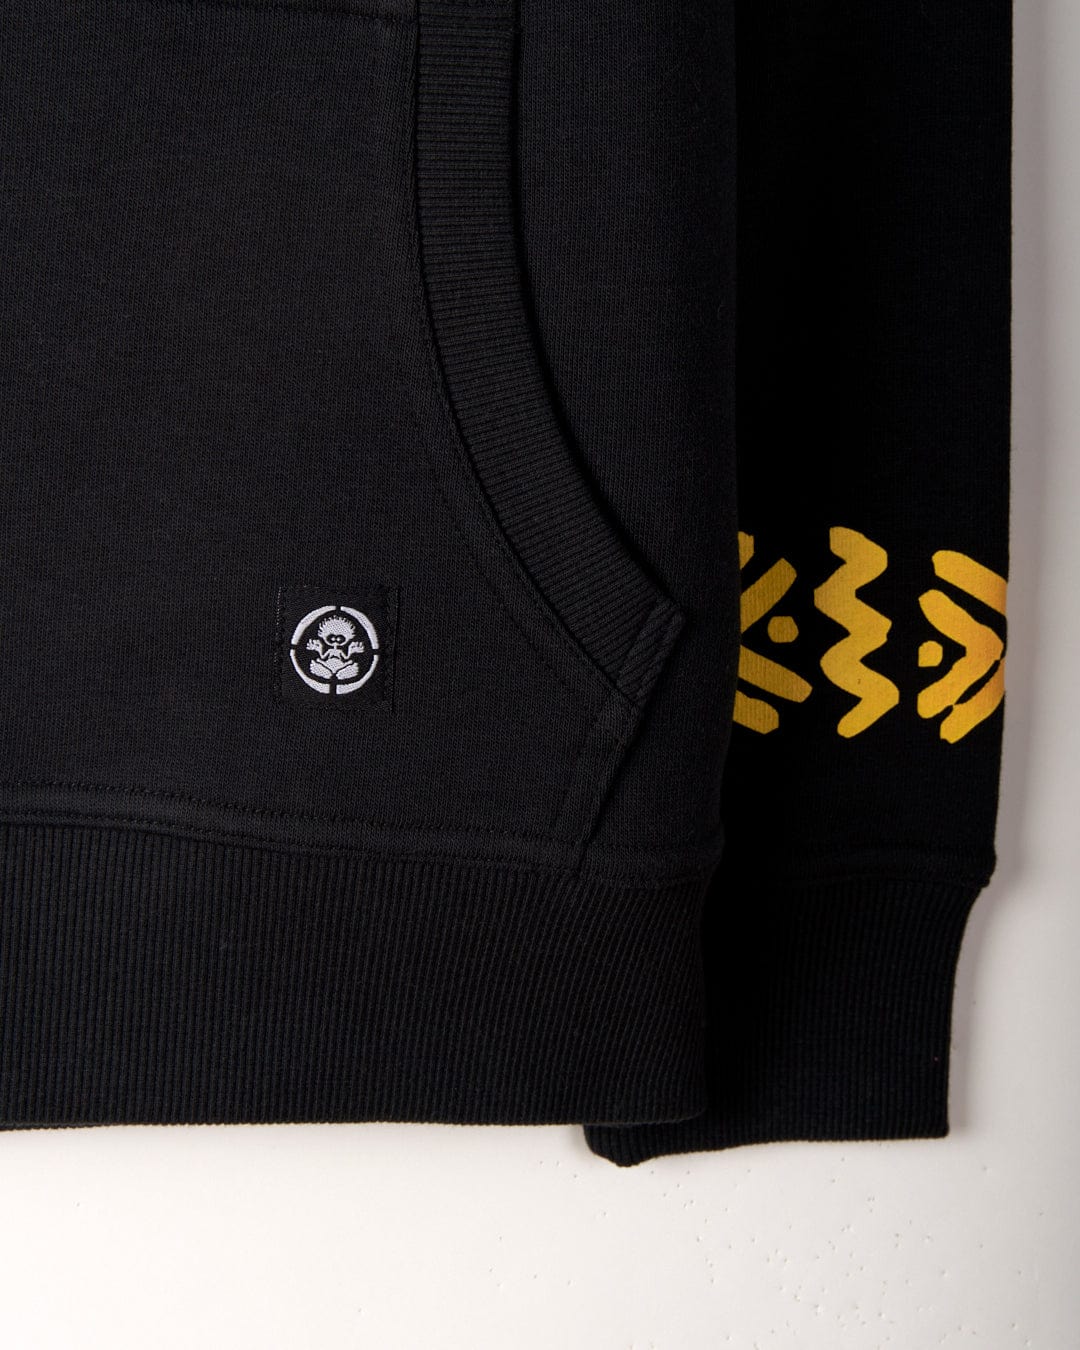 Close-up of a black hoodie featuring Saltrock branding with a small circular logo on the kangaroo pocket and yellow abstract patterns on the sleeve. The product is the See No Skulls - Kids Recycled Pop Hoodie - Black by Saltrock.